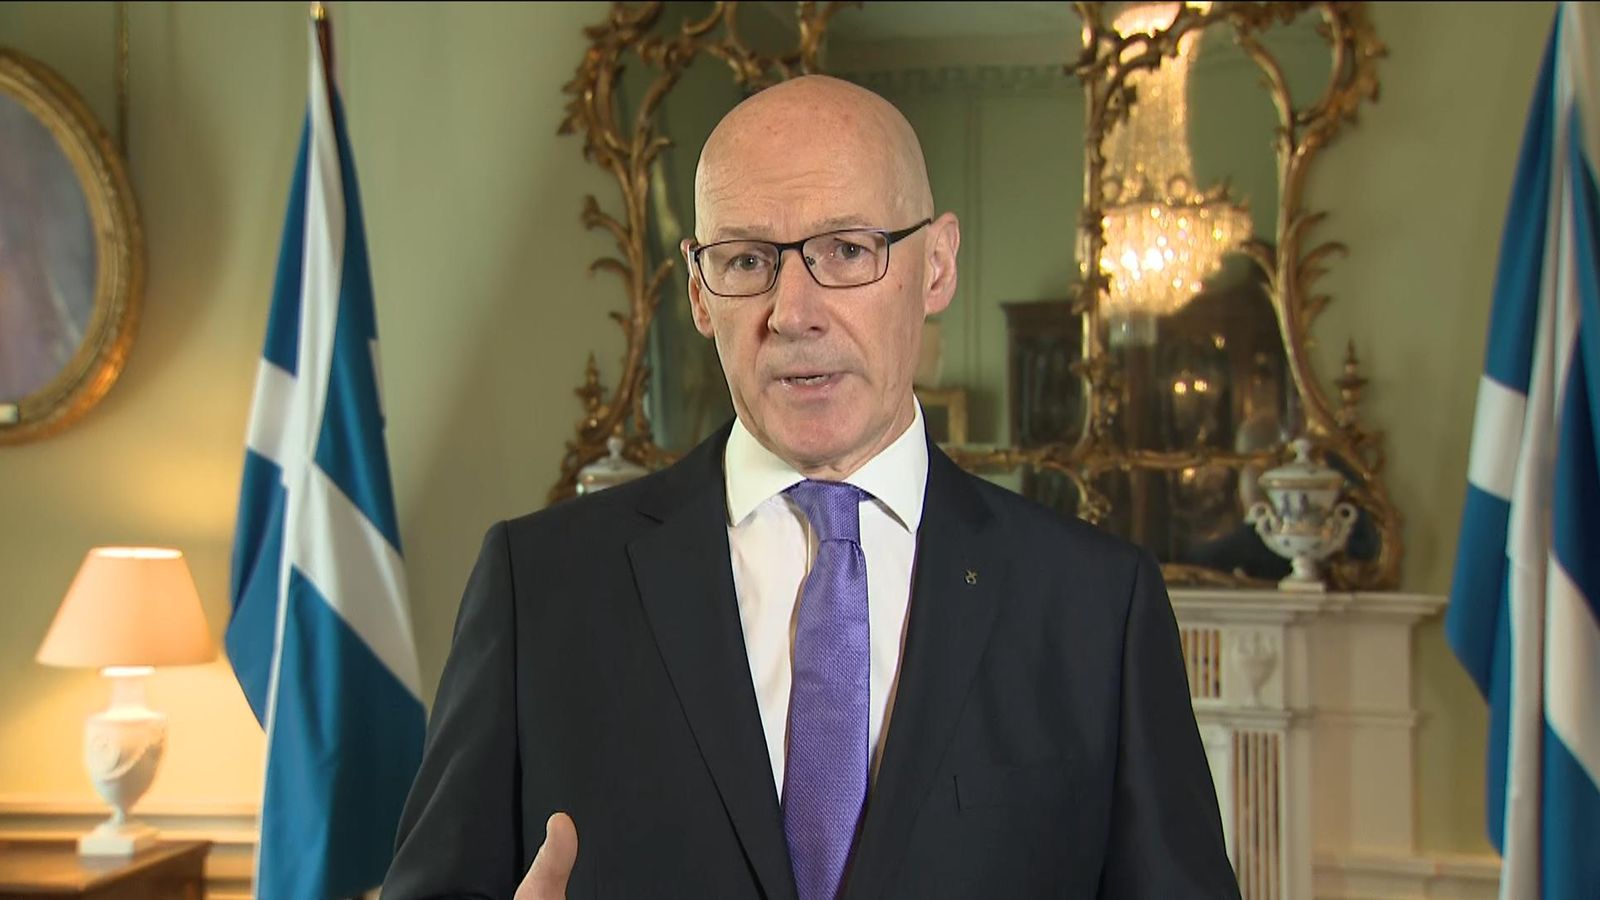 Scotland's new leader John Swinney: Gender recognition reforms 'cannot be implemented' 